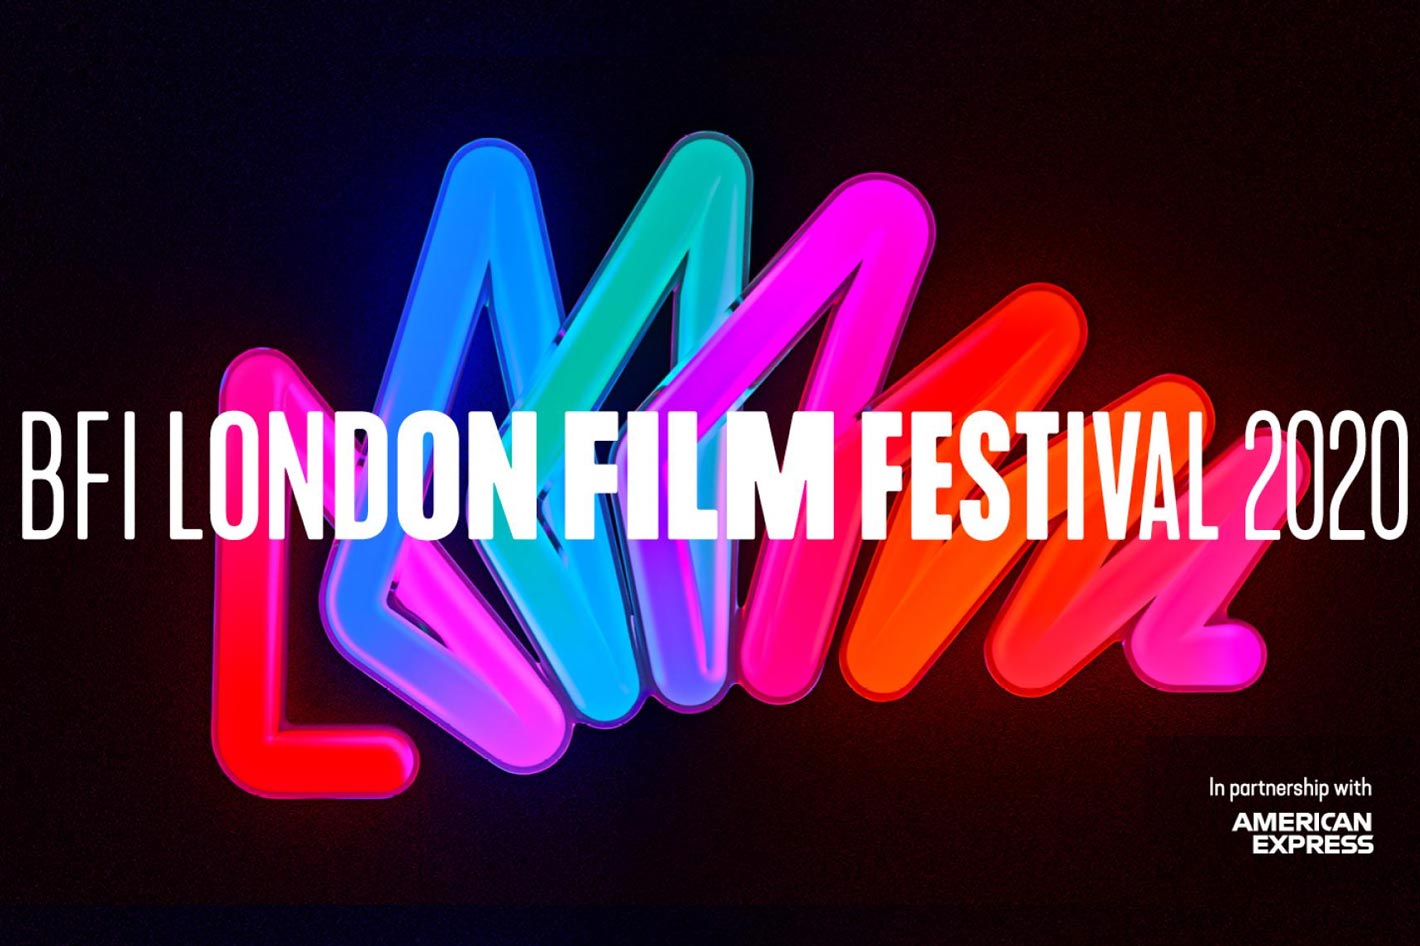 The 64th BFI London Film Festival reaches the whole world… online by Jose  Antunes - ProVideo Coalition